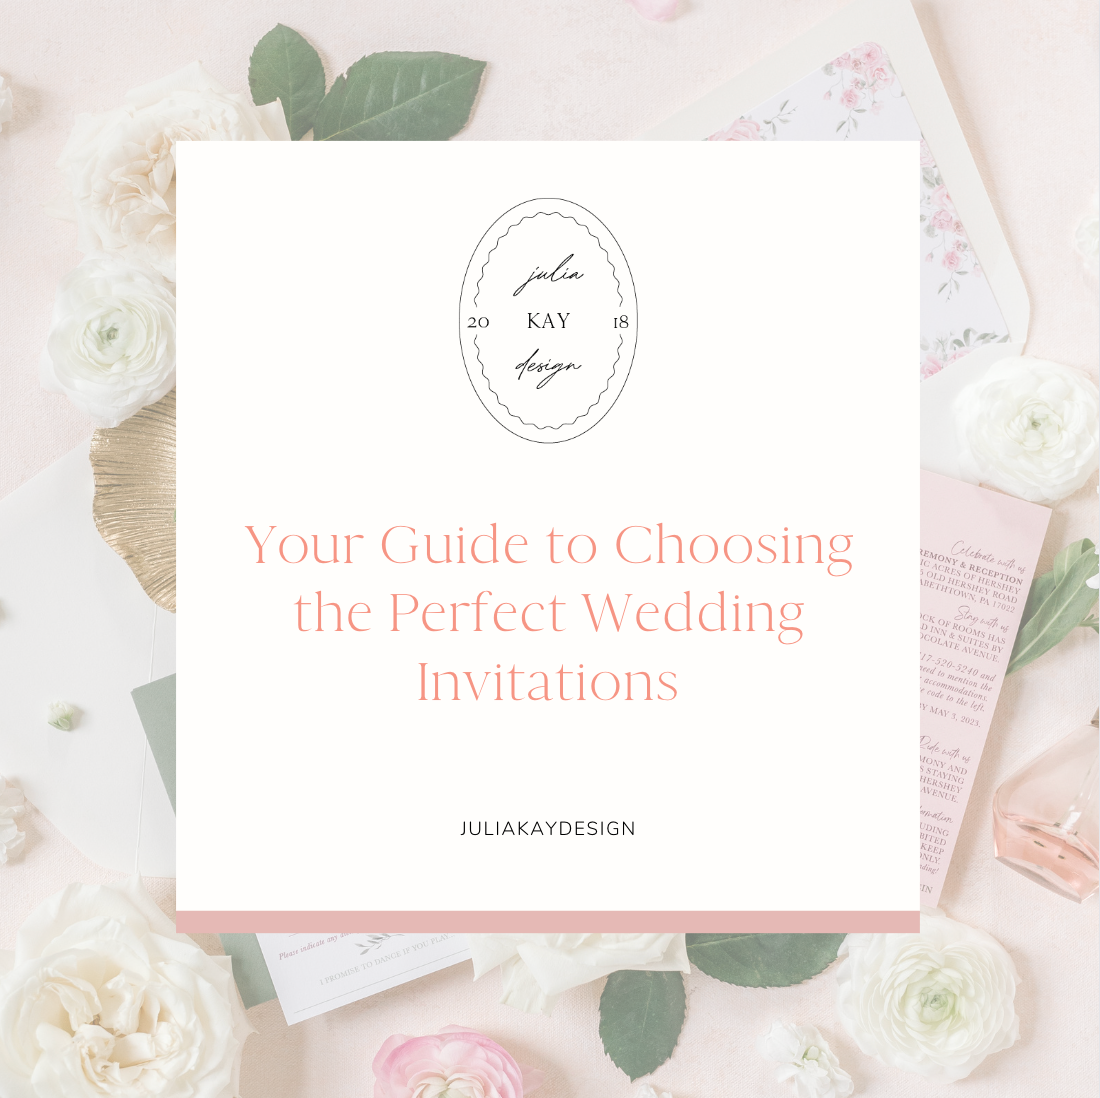 Your Guide to Choosing the Perfect Wedding Invitations